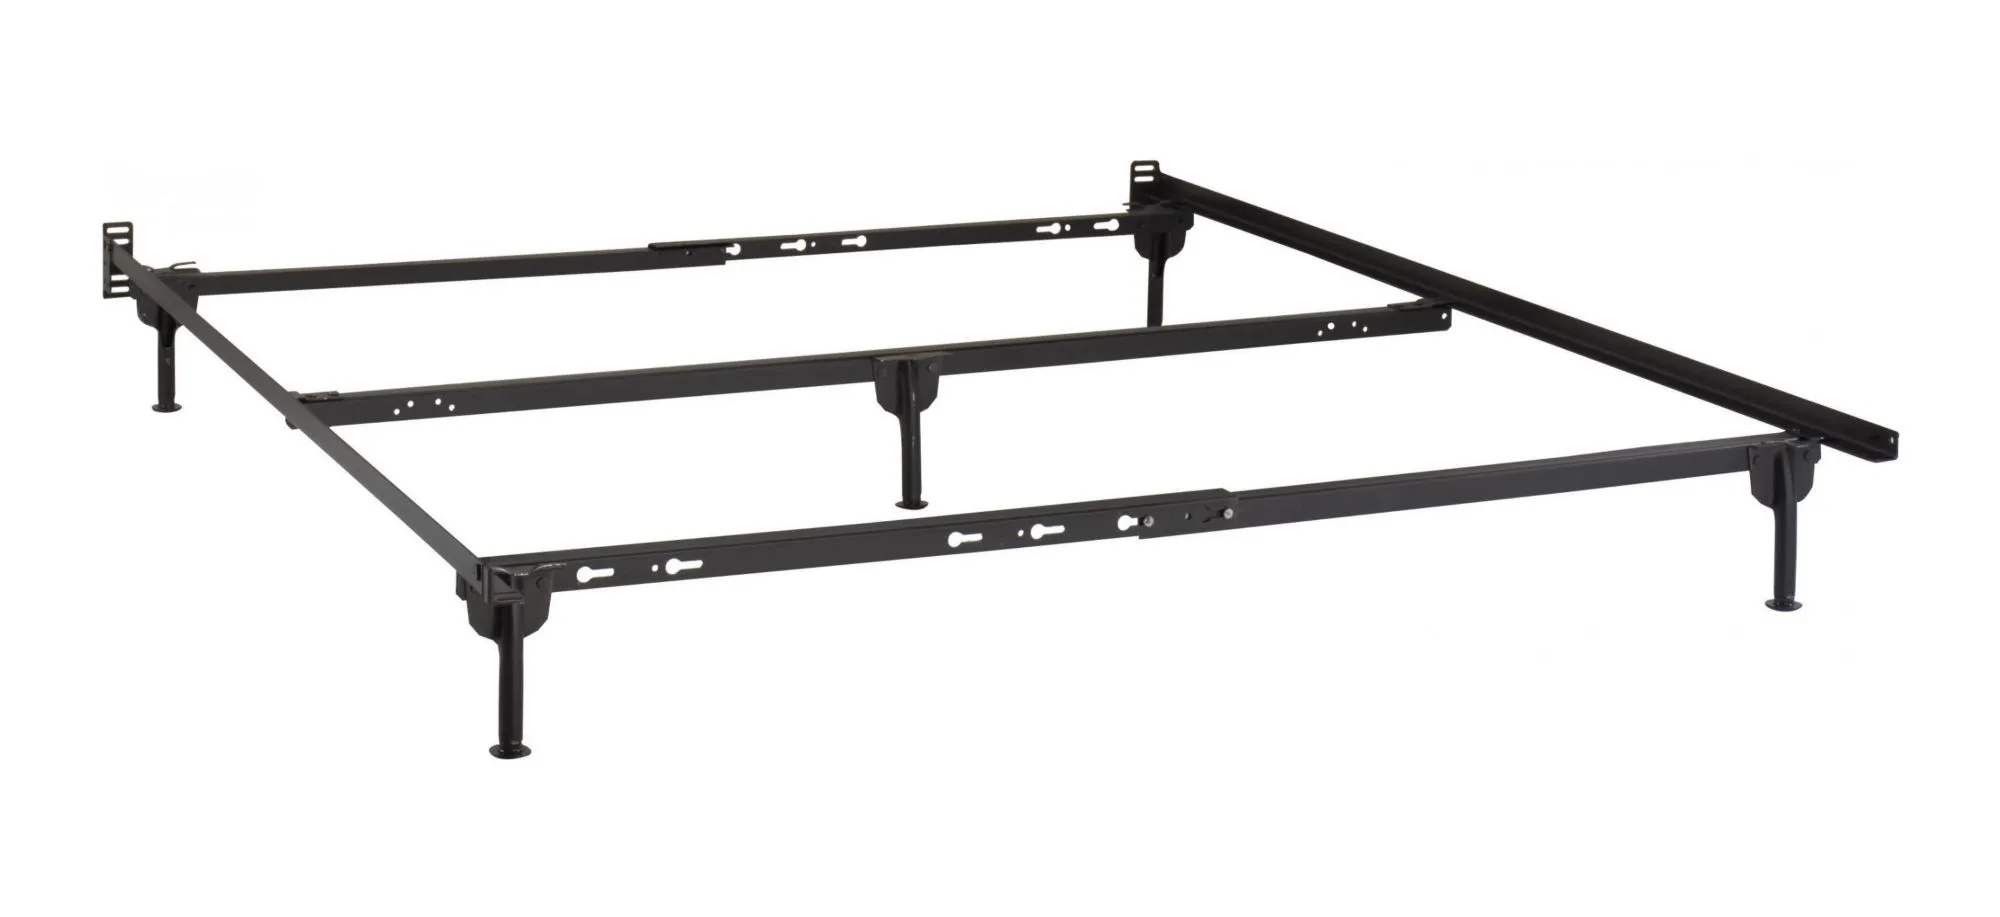 Adjustable Bed Frame w/ Glides - Twin/Full/Queen by Glideaway.